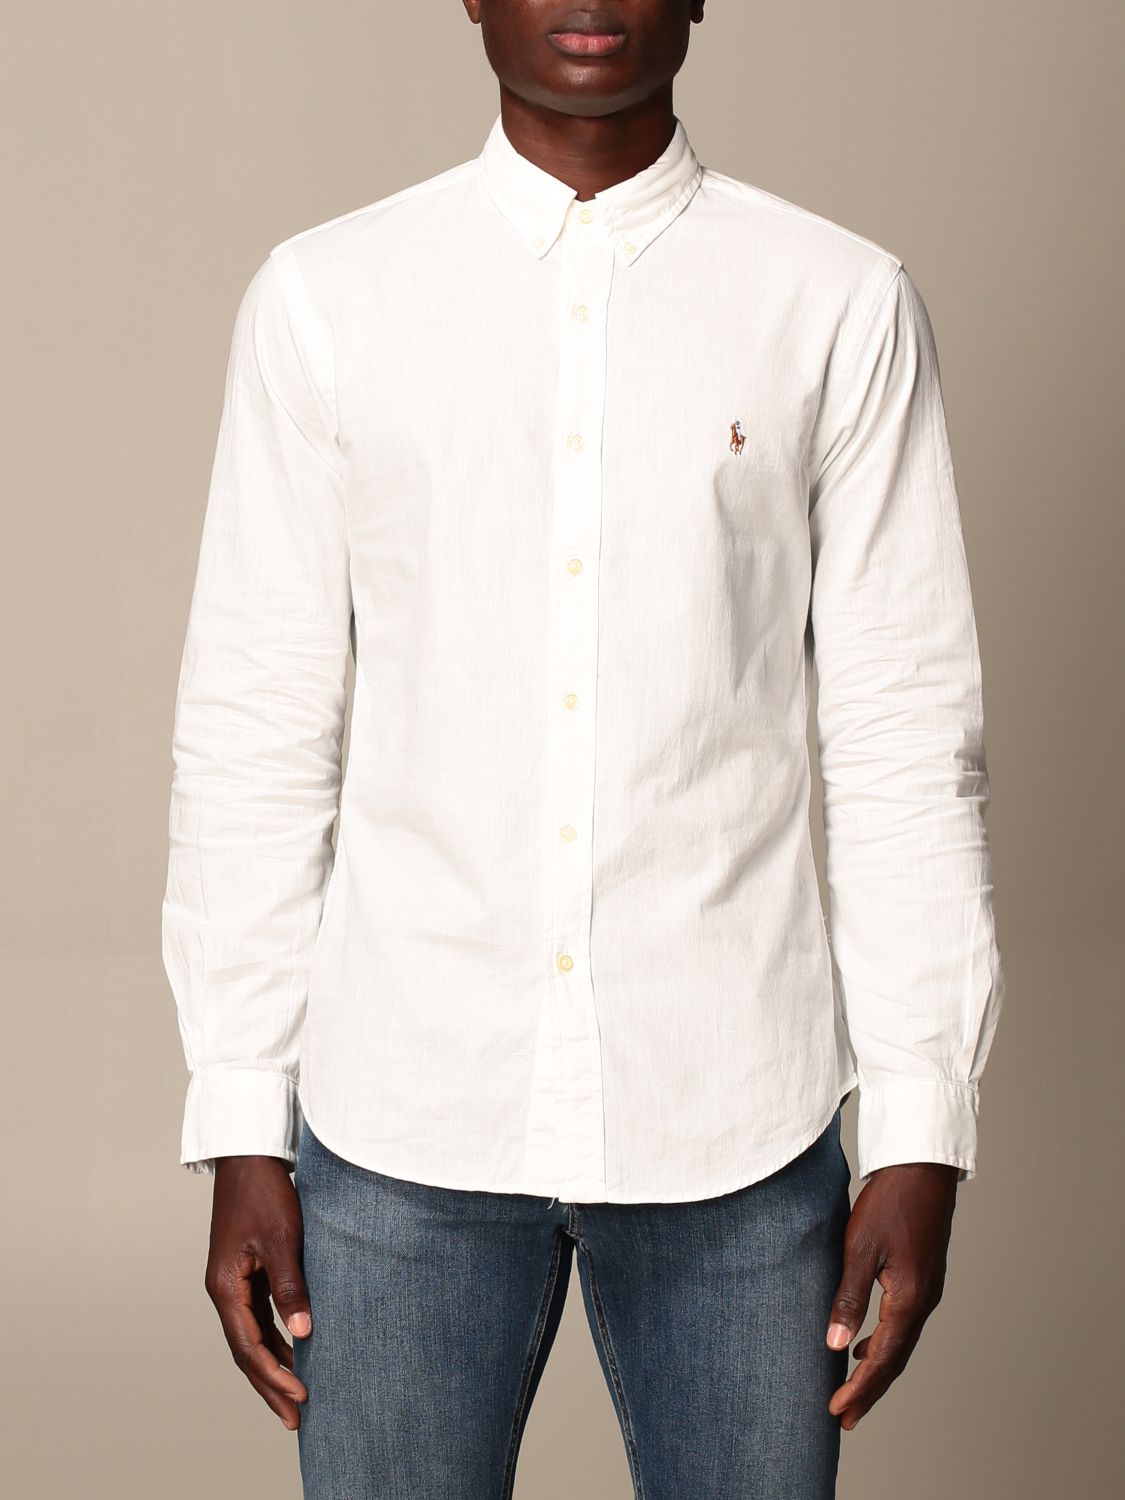 Premier Mentality In other words POLO RALPH LAUREN: cotton shirt with logo - White | Shirt Polo Ralph Lauren  710795457 GIGLIO.COM